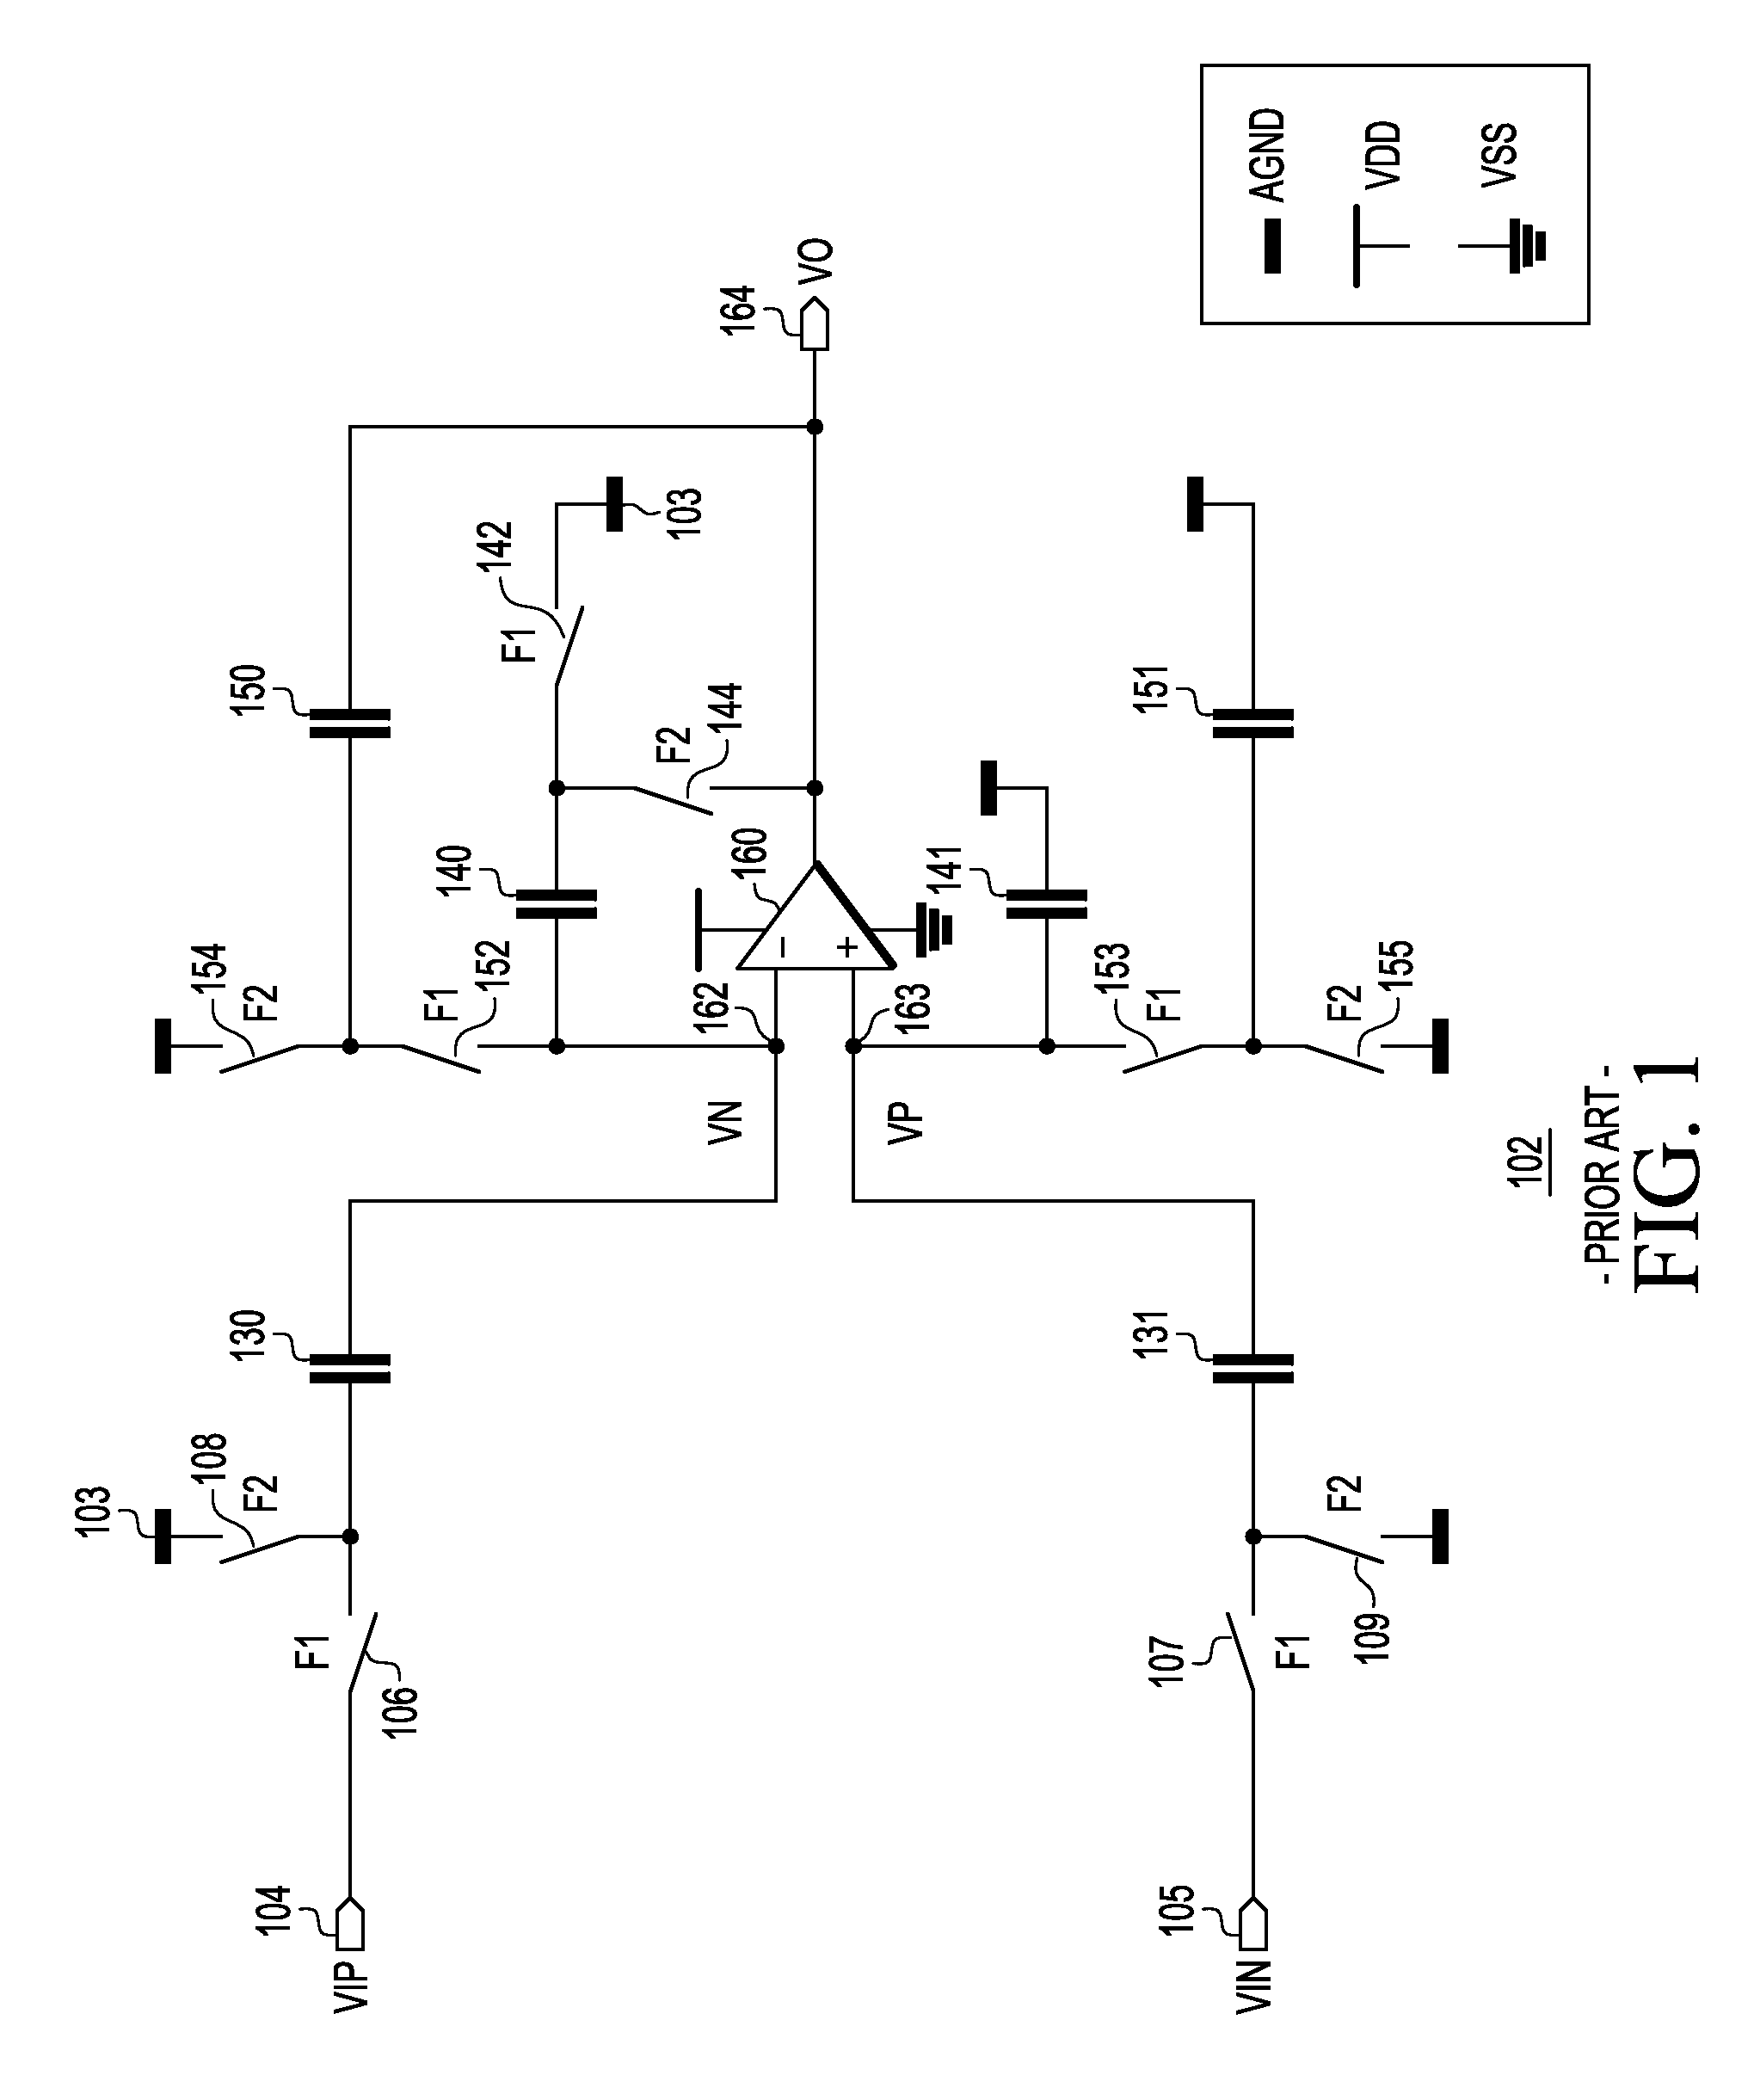 Switched-capacitor amplifier circuit